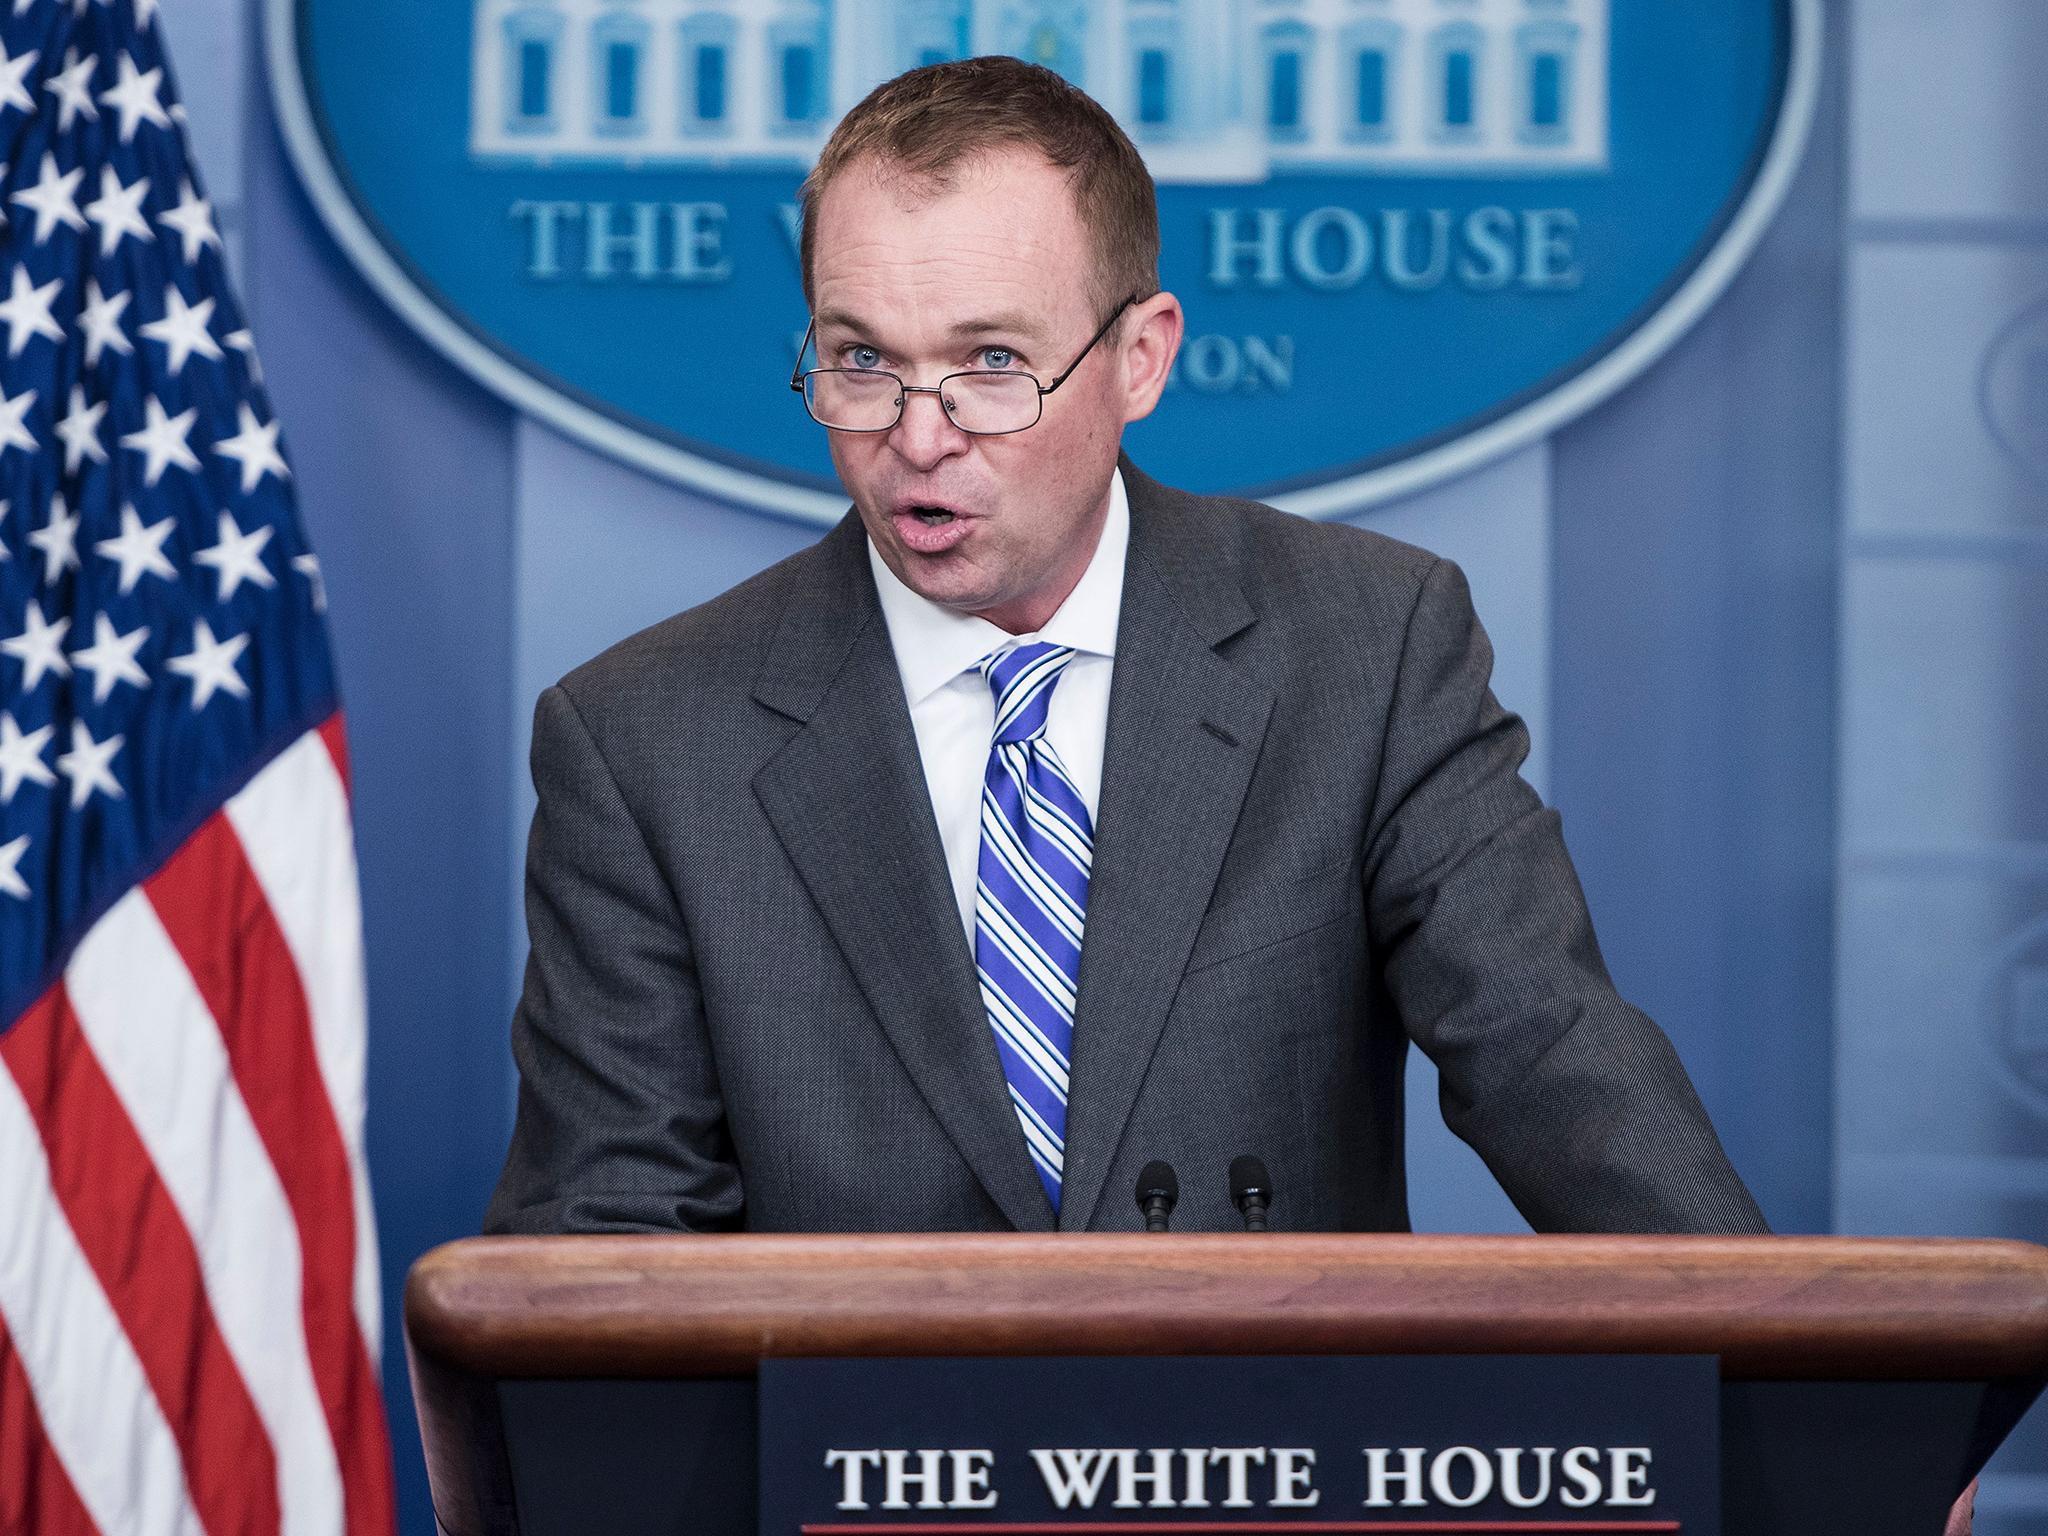 White House Budget Chief Mick Mulvaney has been appointed as the head of the top US consumer agency by President Trump